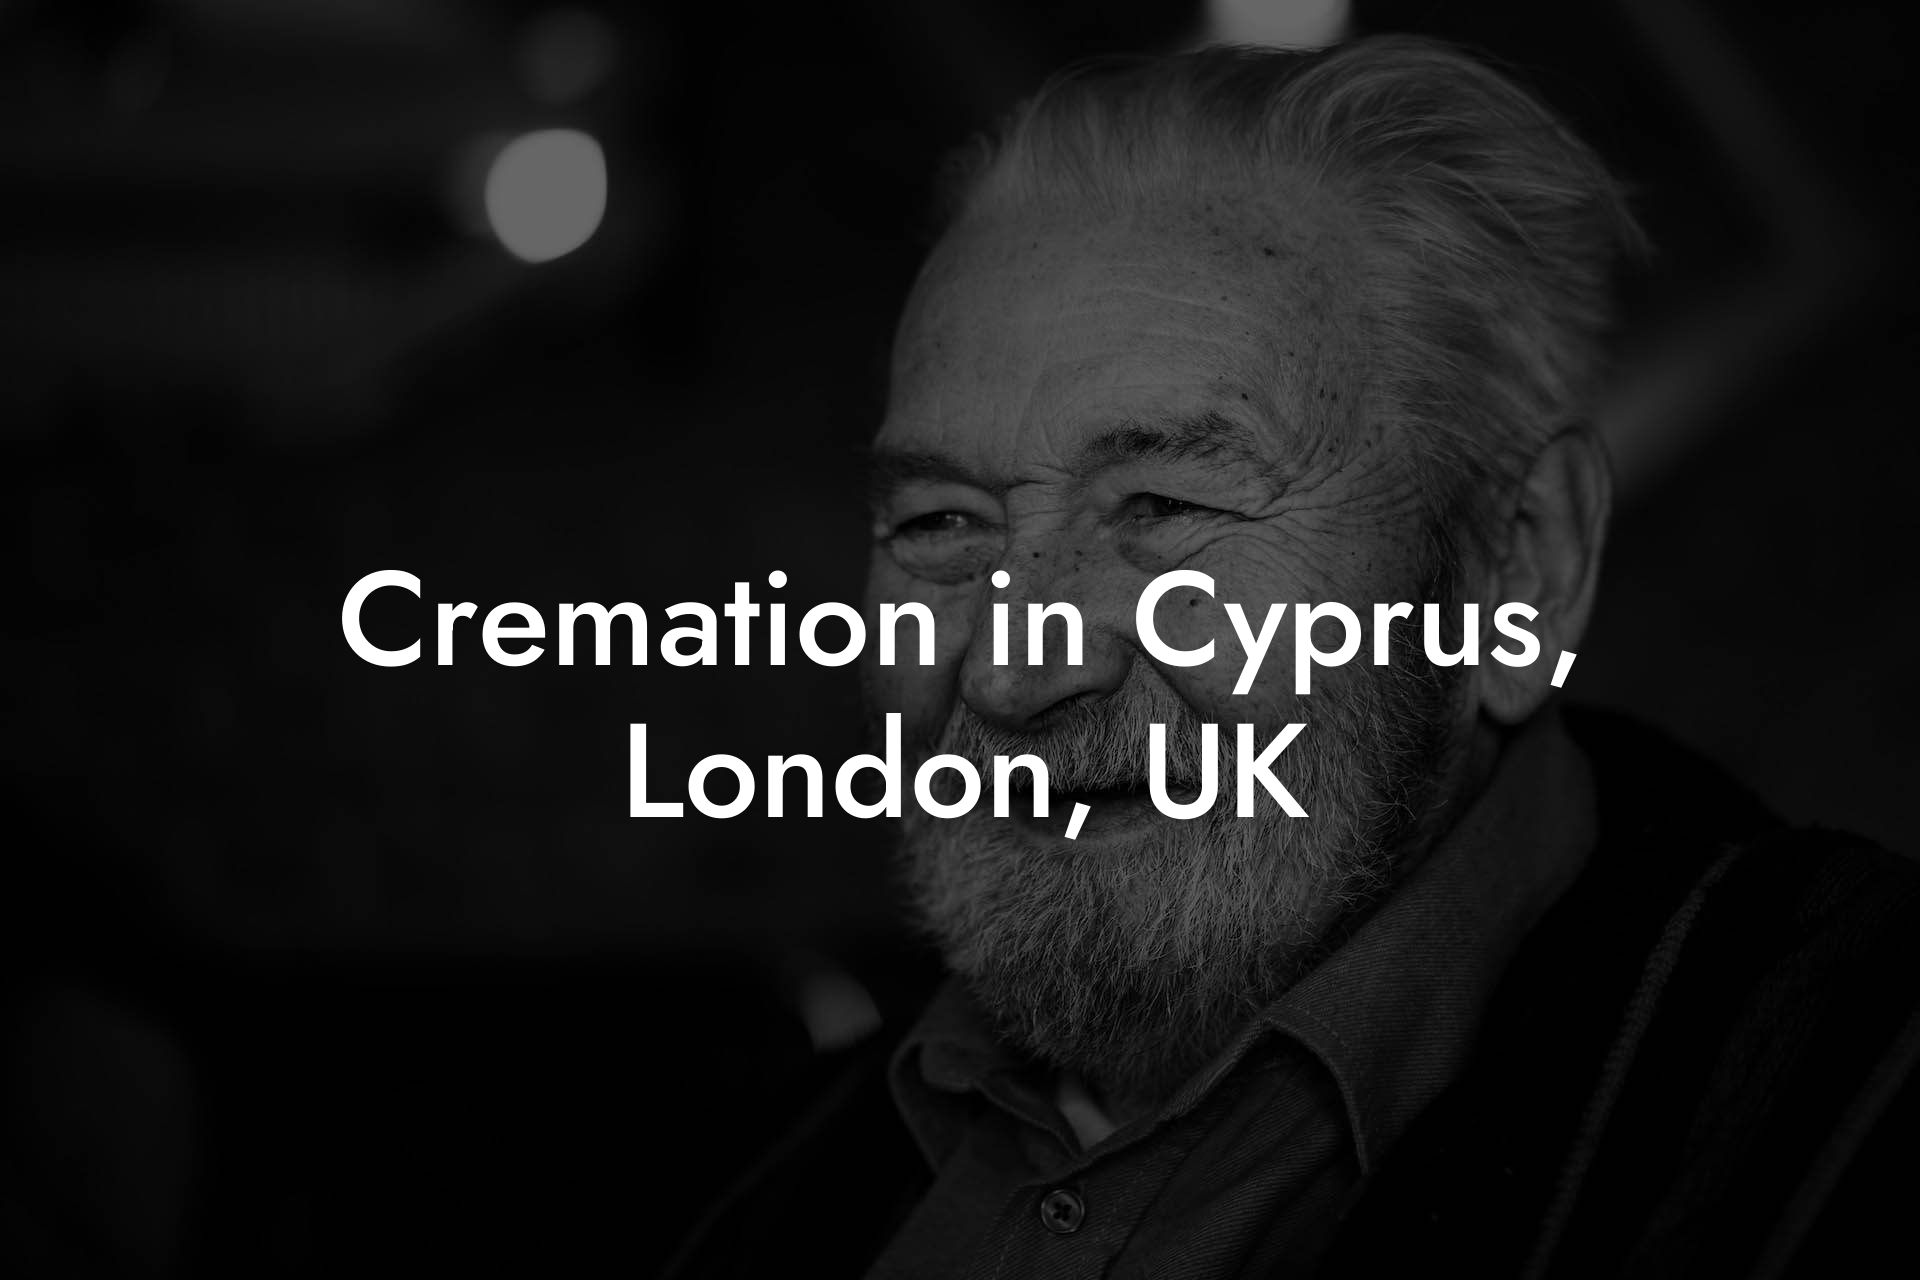 Cremation in Cyprus, London, UK